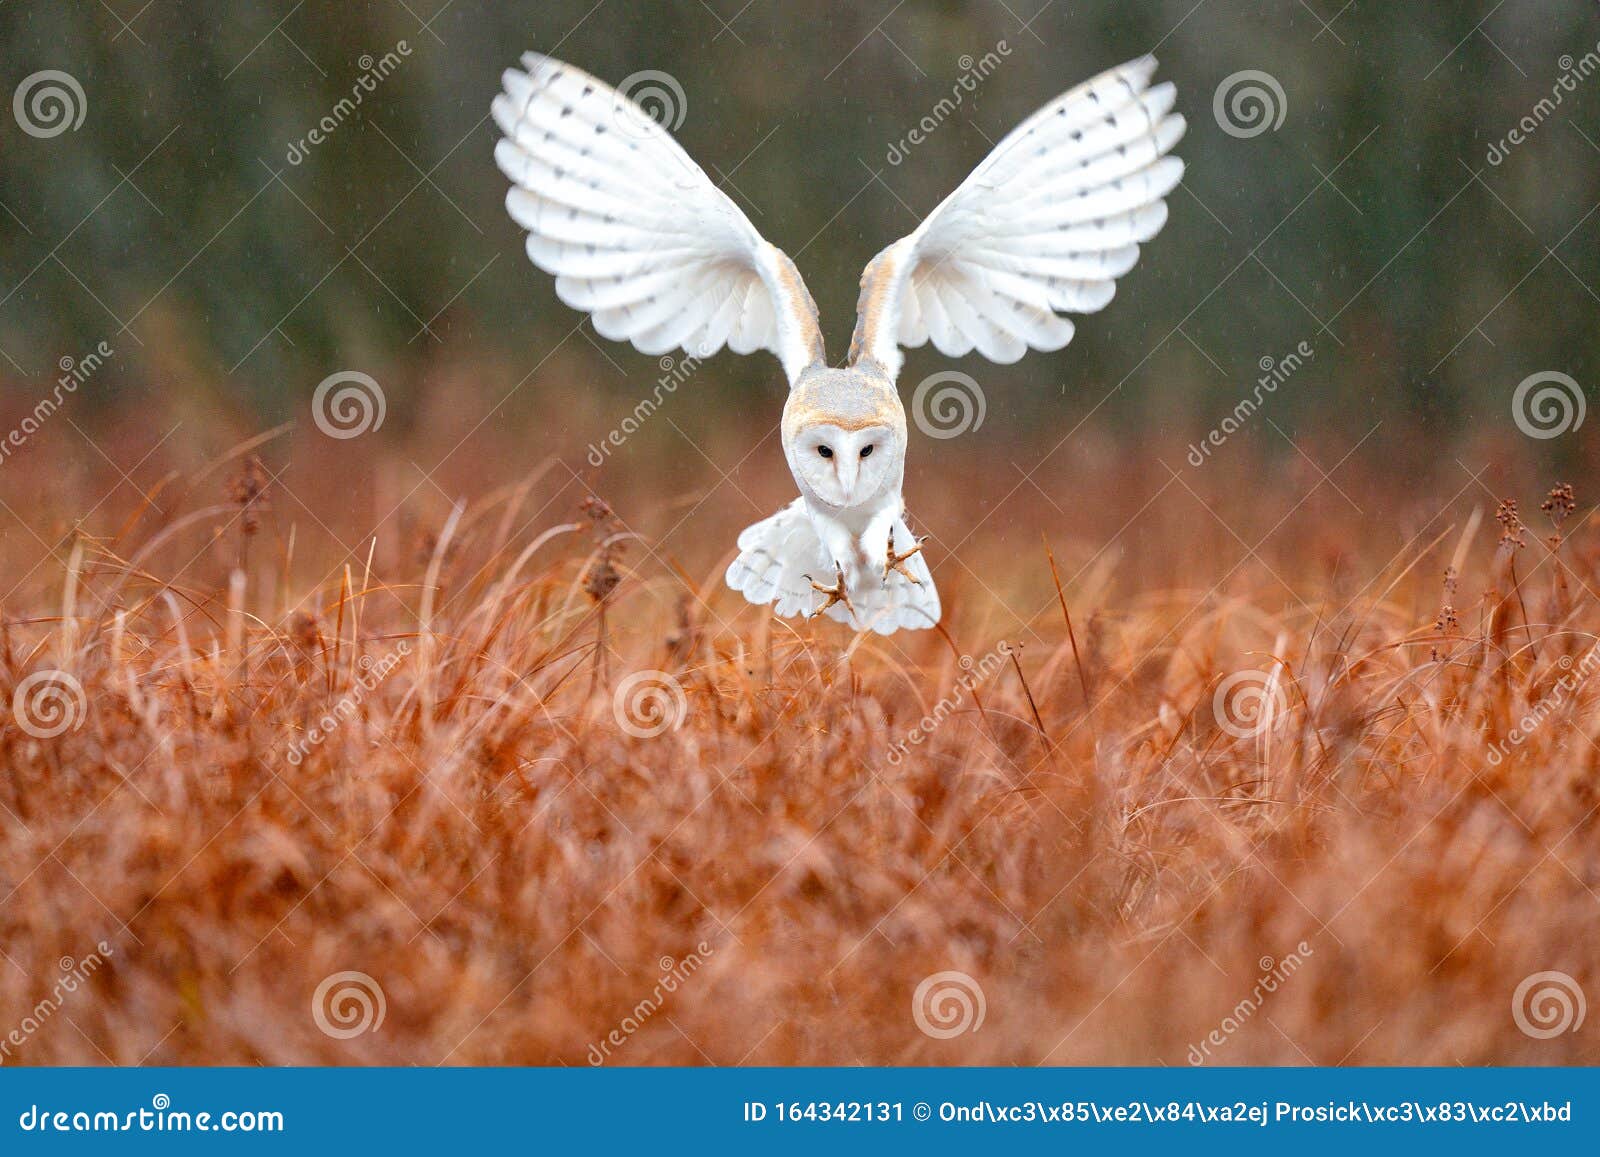 owl landing fly with open wings. barn owl, tyto alba, flight above red grass in the morning. wildlife bird scene from nature. cold